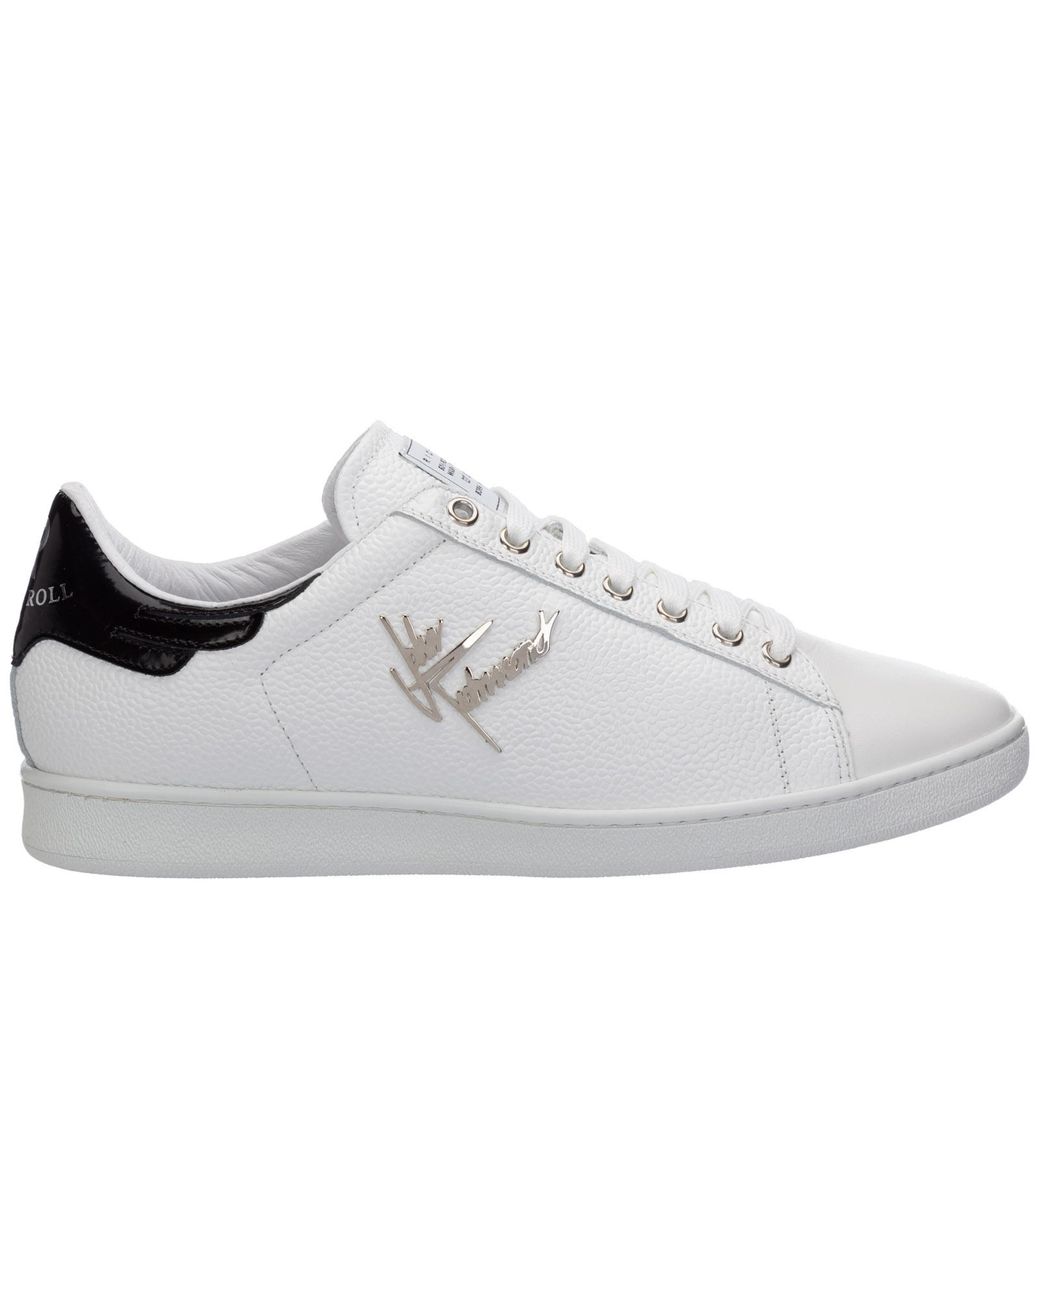 John Richmond Men's Shoes Leather Trainers Sneakers in White for Men - Lyst